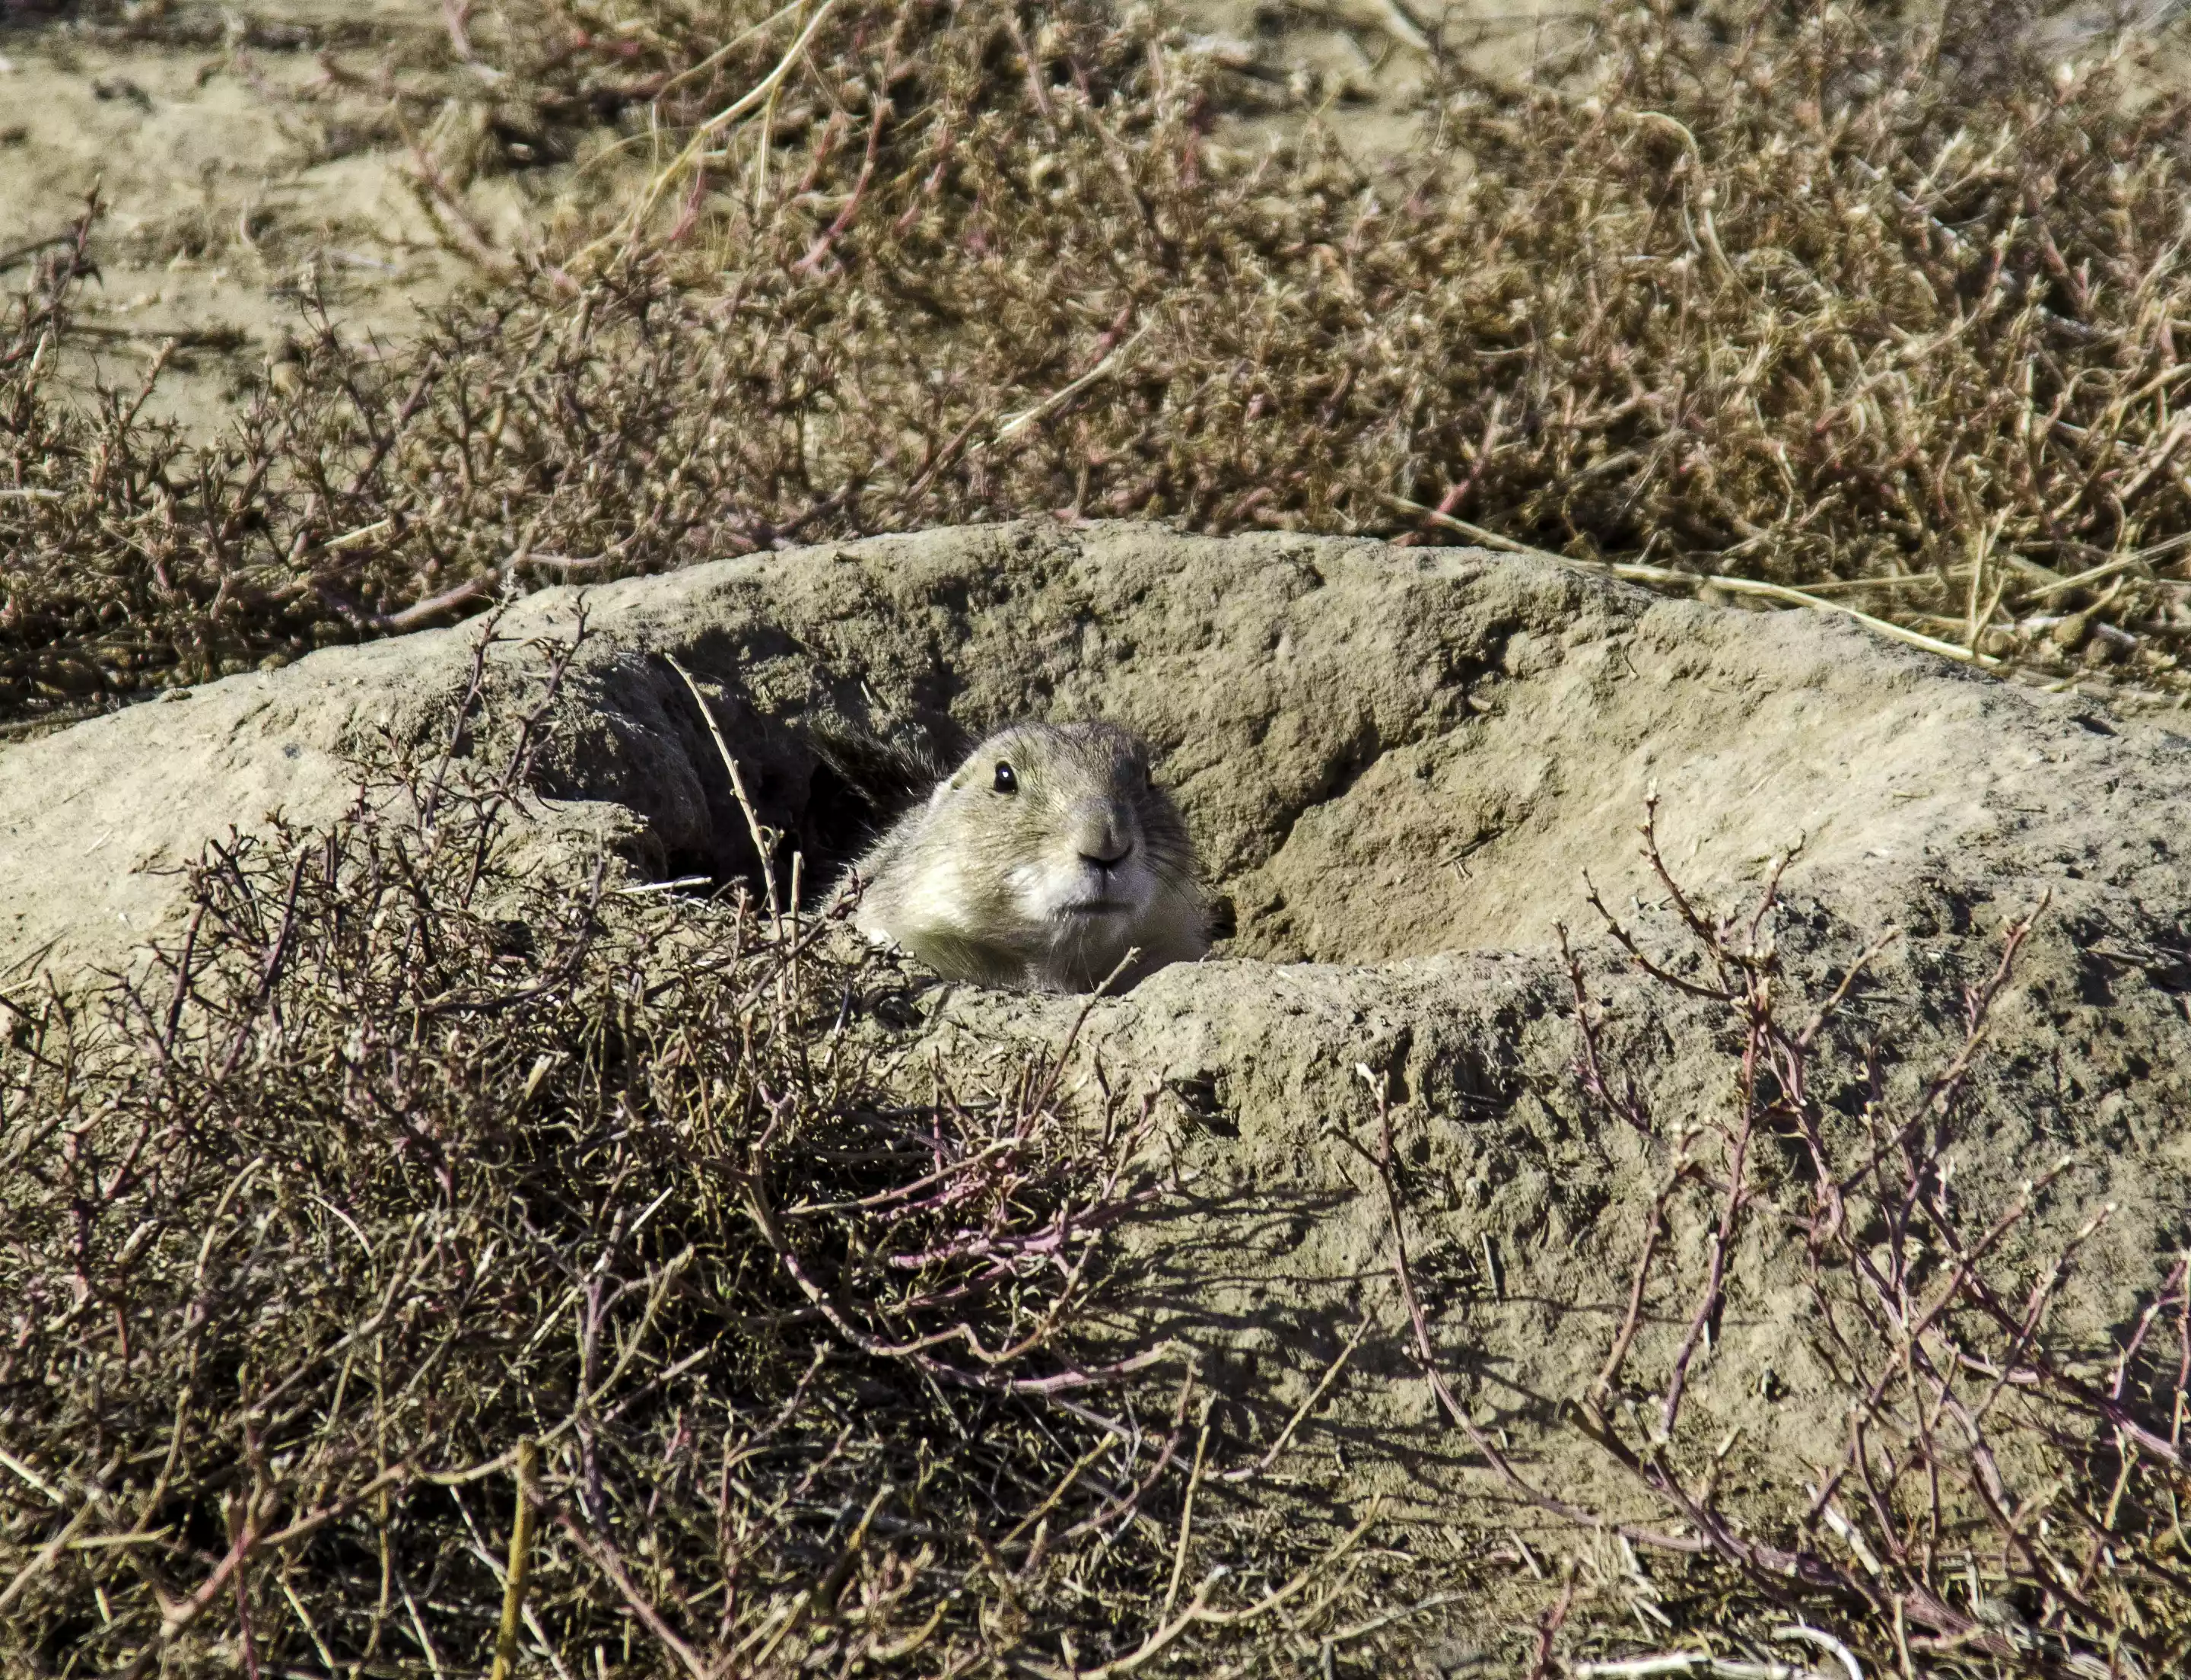 A prairie dog emerges from a hole surrounded by vegetation.